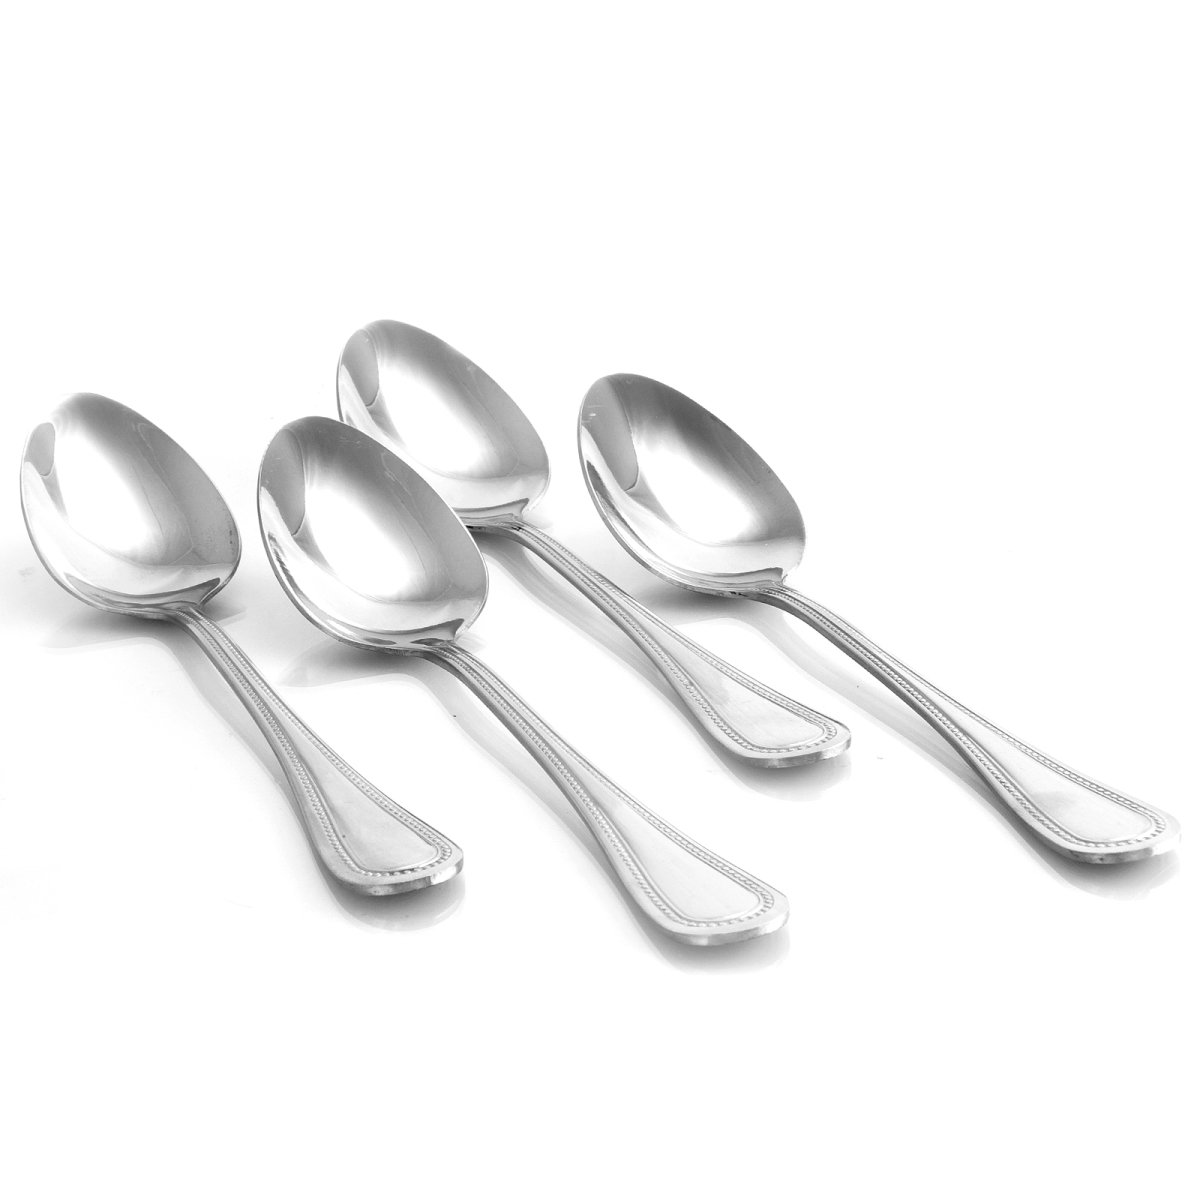 Picture of Gibson Home 112099.04 Graylyn Stainless Steel Beaded Edge Dinner Spoon Set - 4 Piece